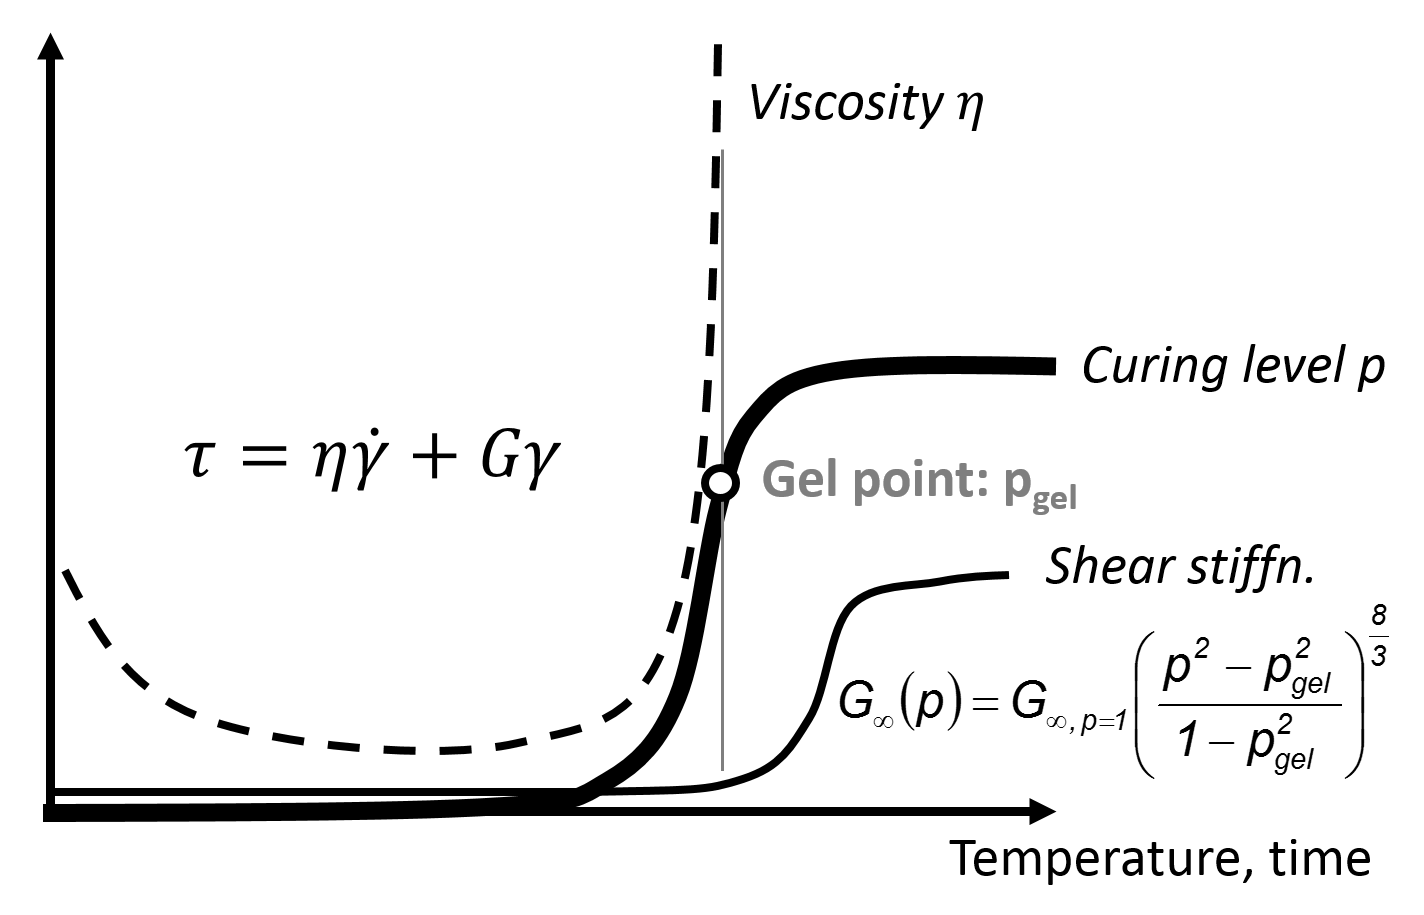 Diagram showing some Viscoelastic Material Properties like Viscosity, Gel Point and Shear Stiffness depending on Temperaure and Time